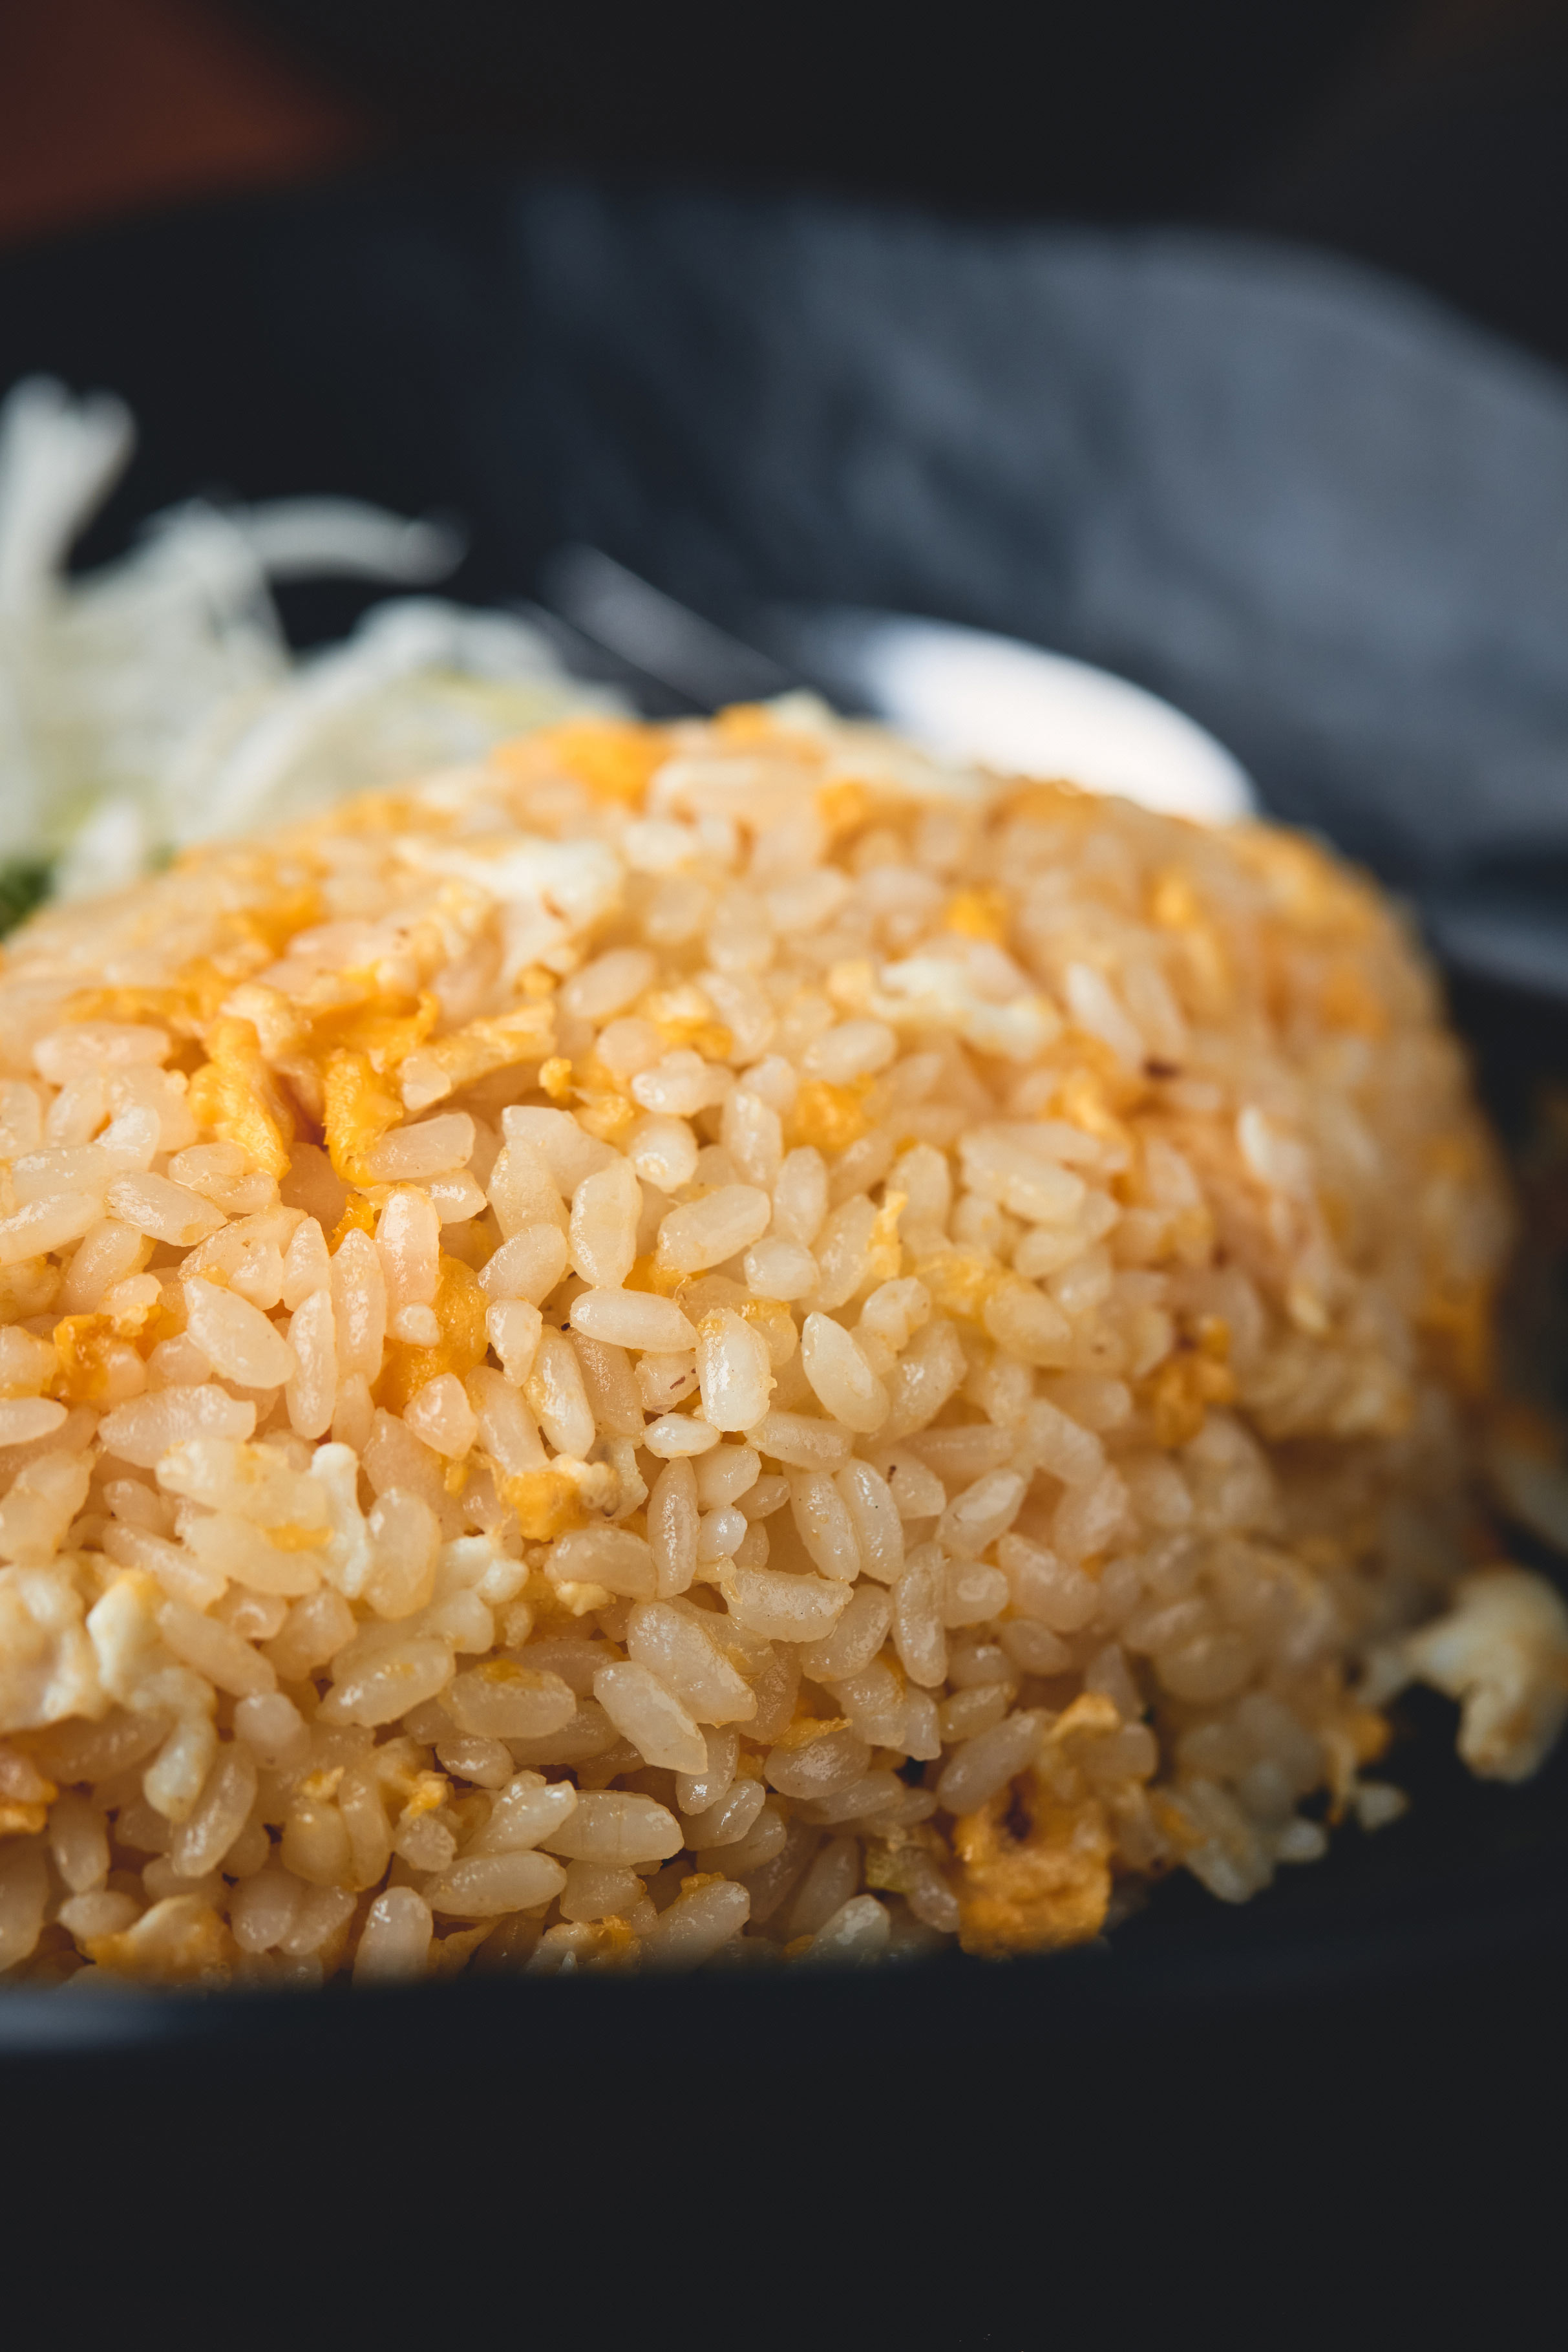 Why Japanese-style fried rice?